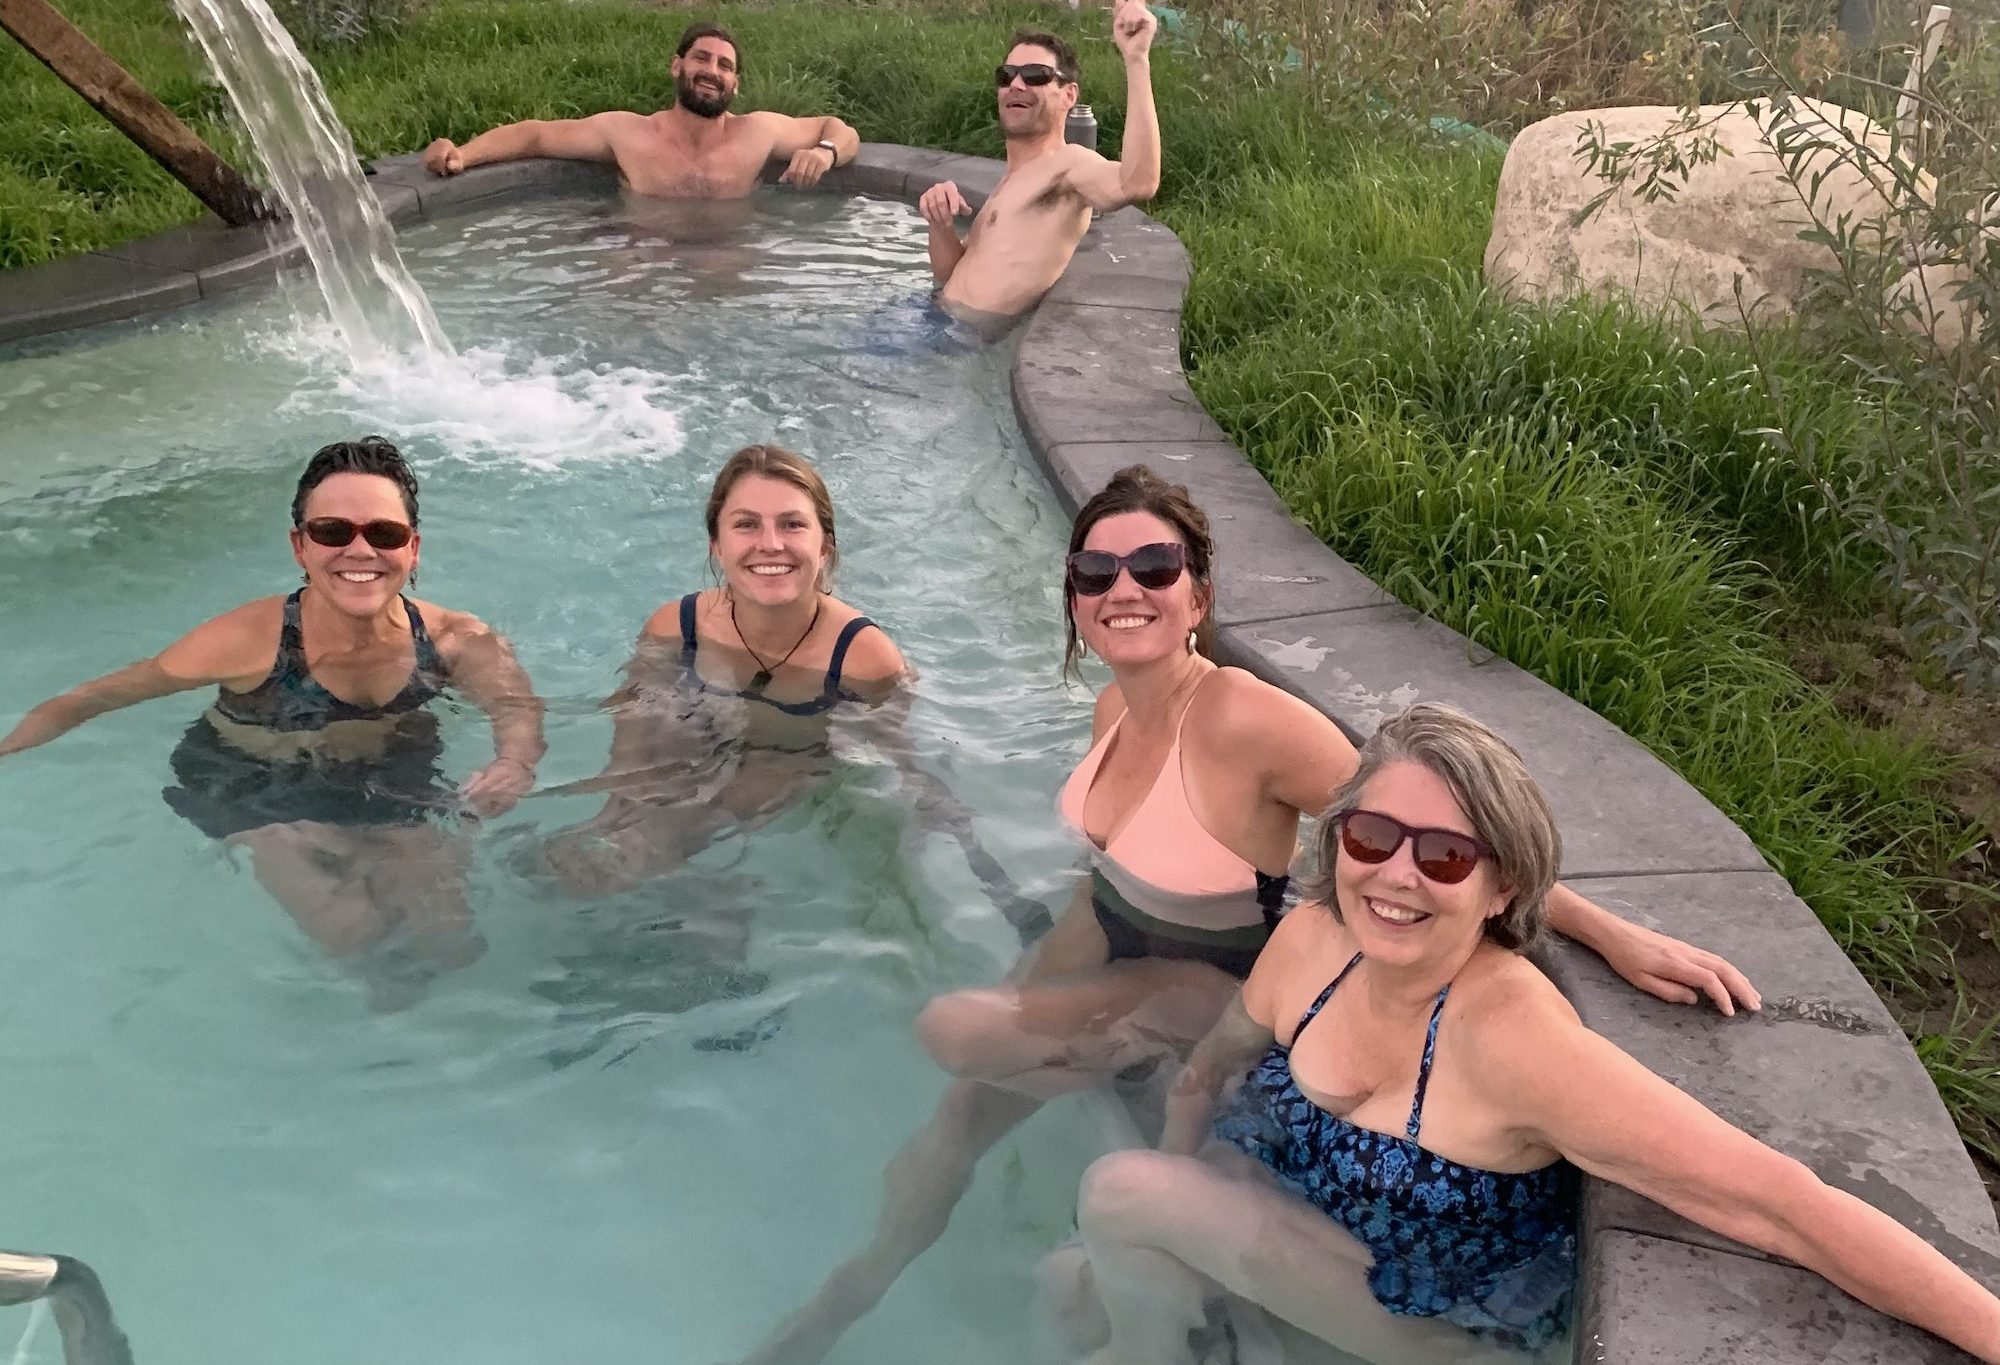 Guests relax in a hot springs pool next to grass.